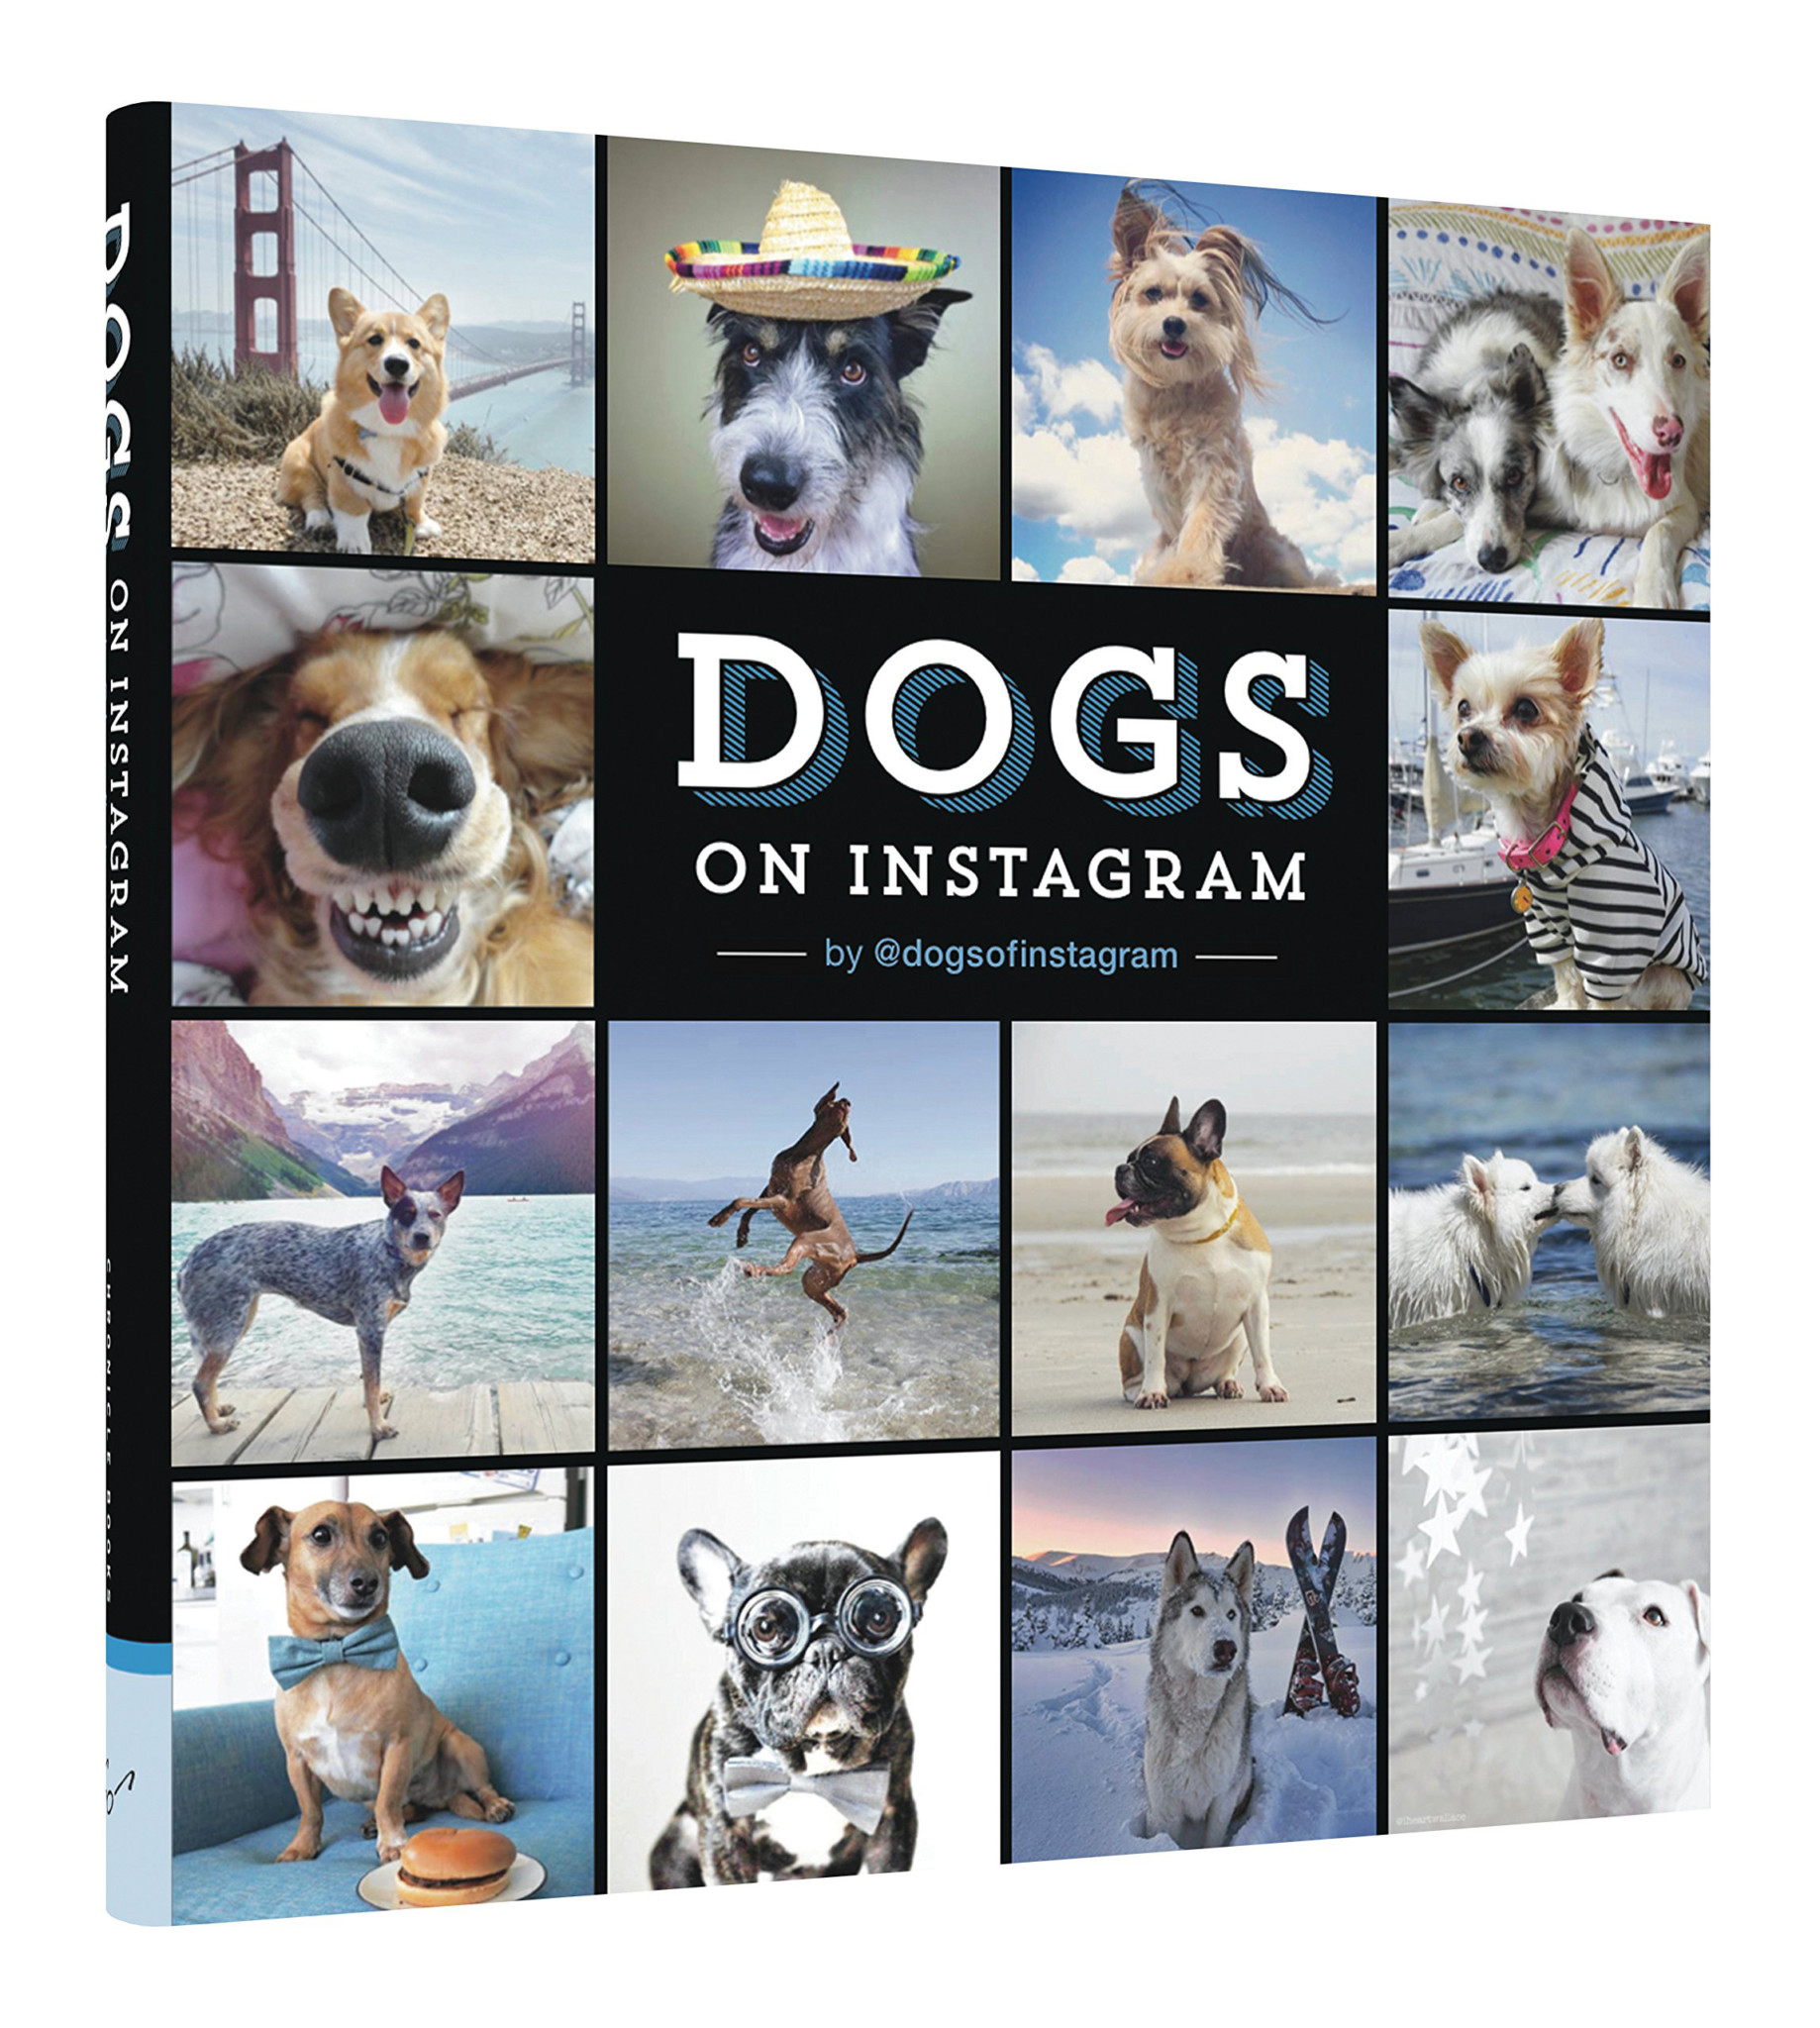 Dogs on Instagram Photo Book